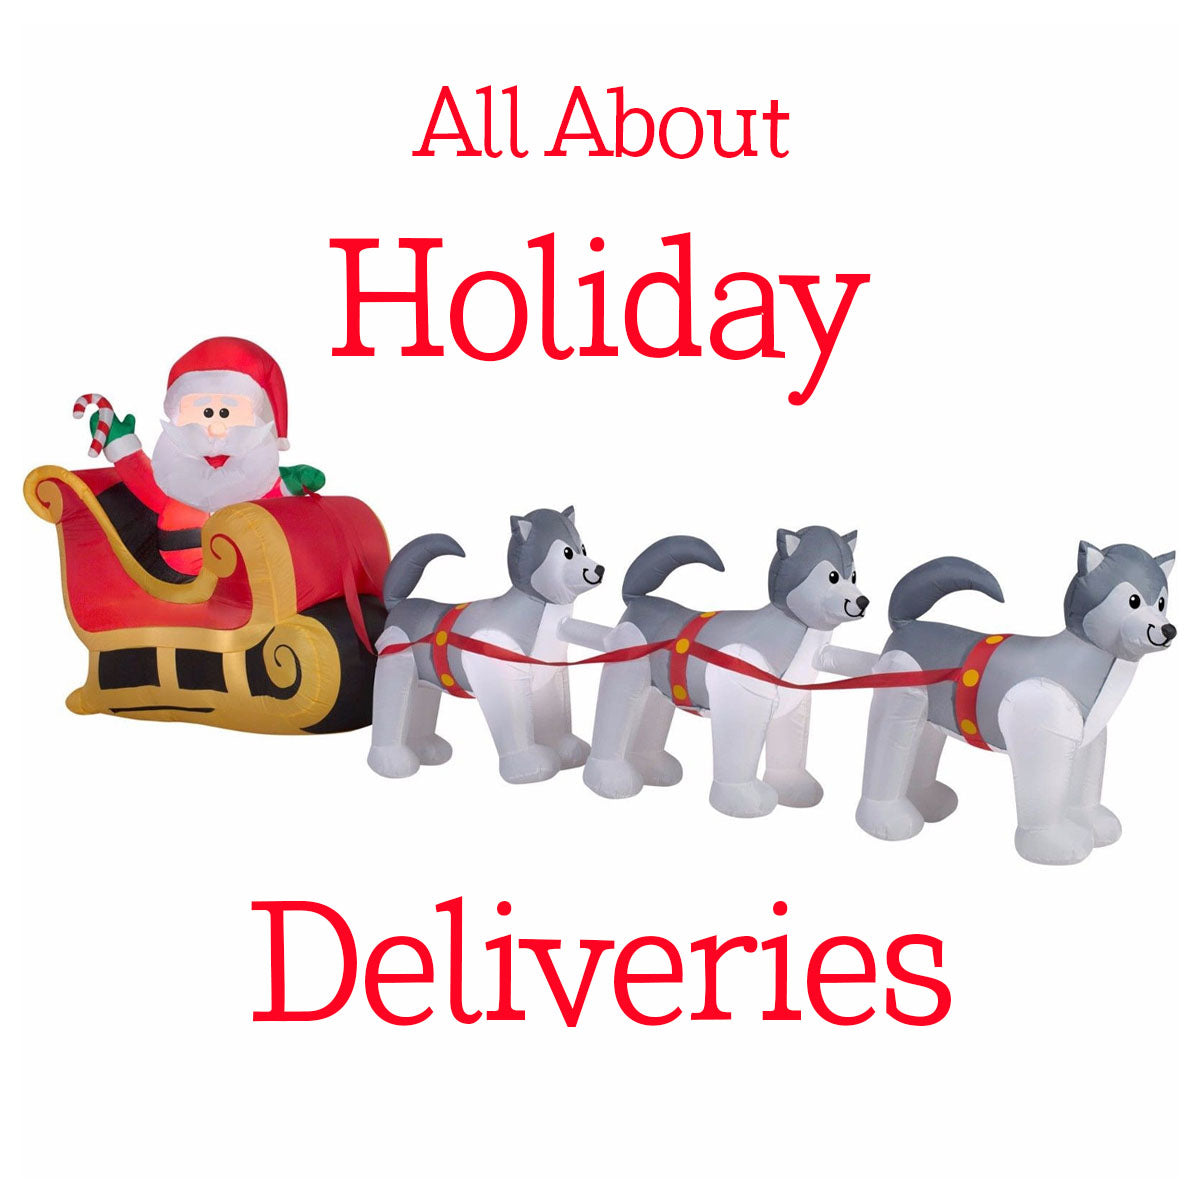 All About Holiday Deliveries